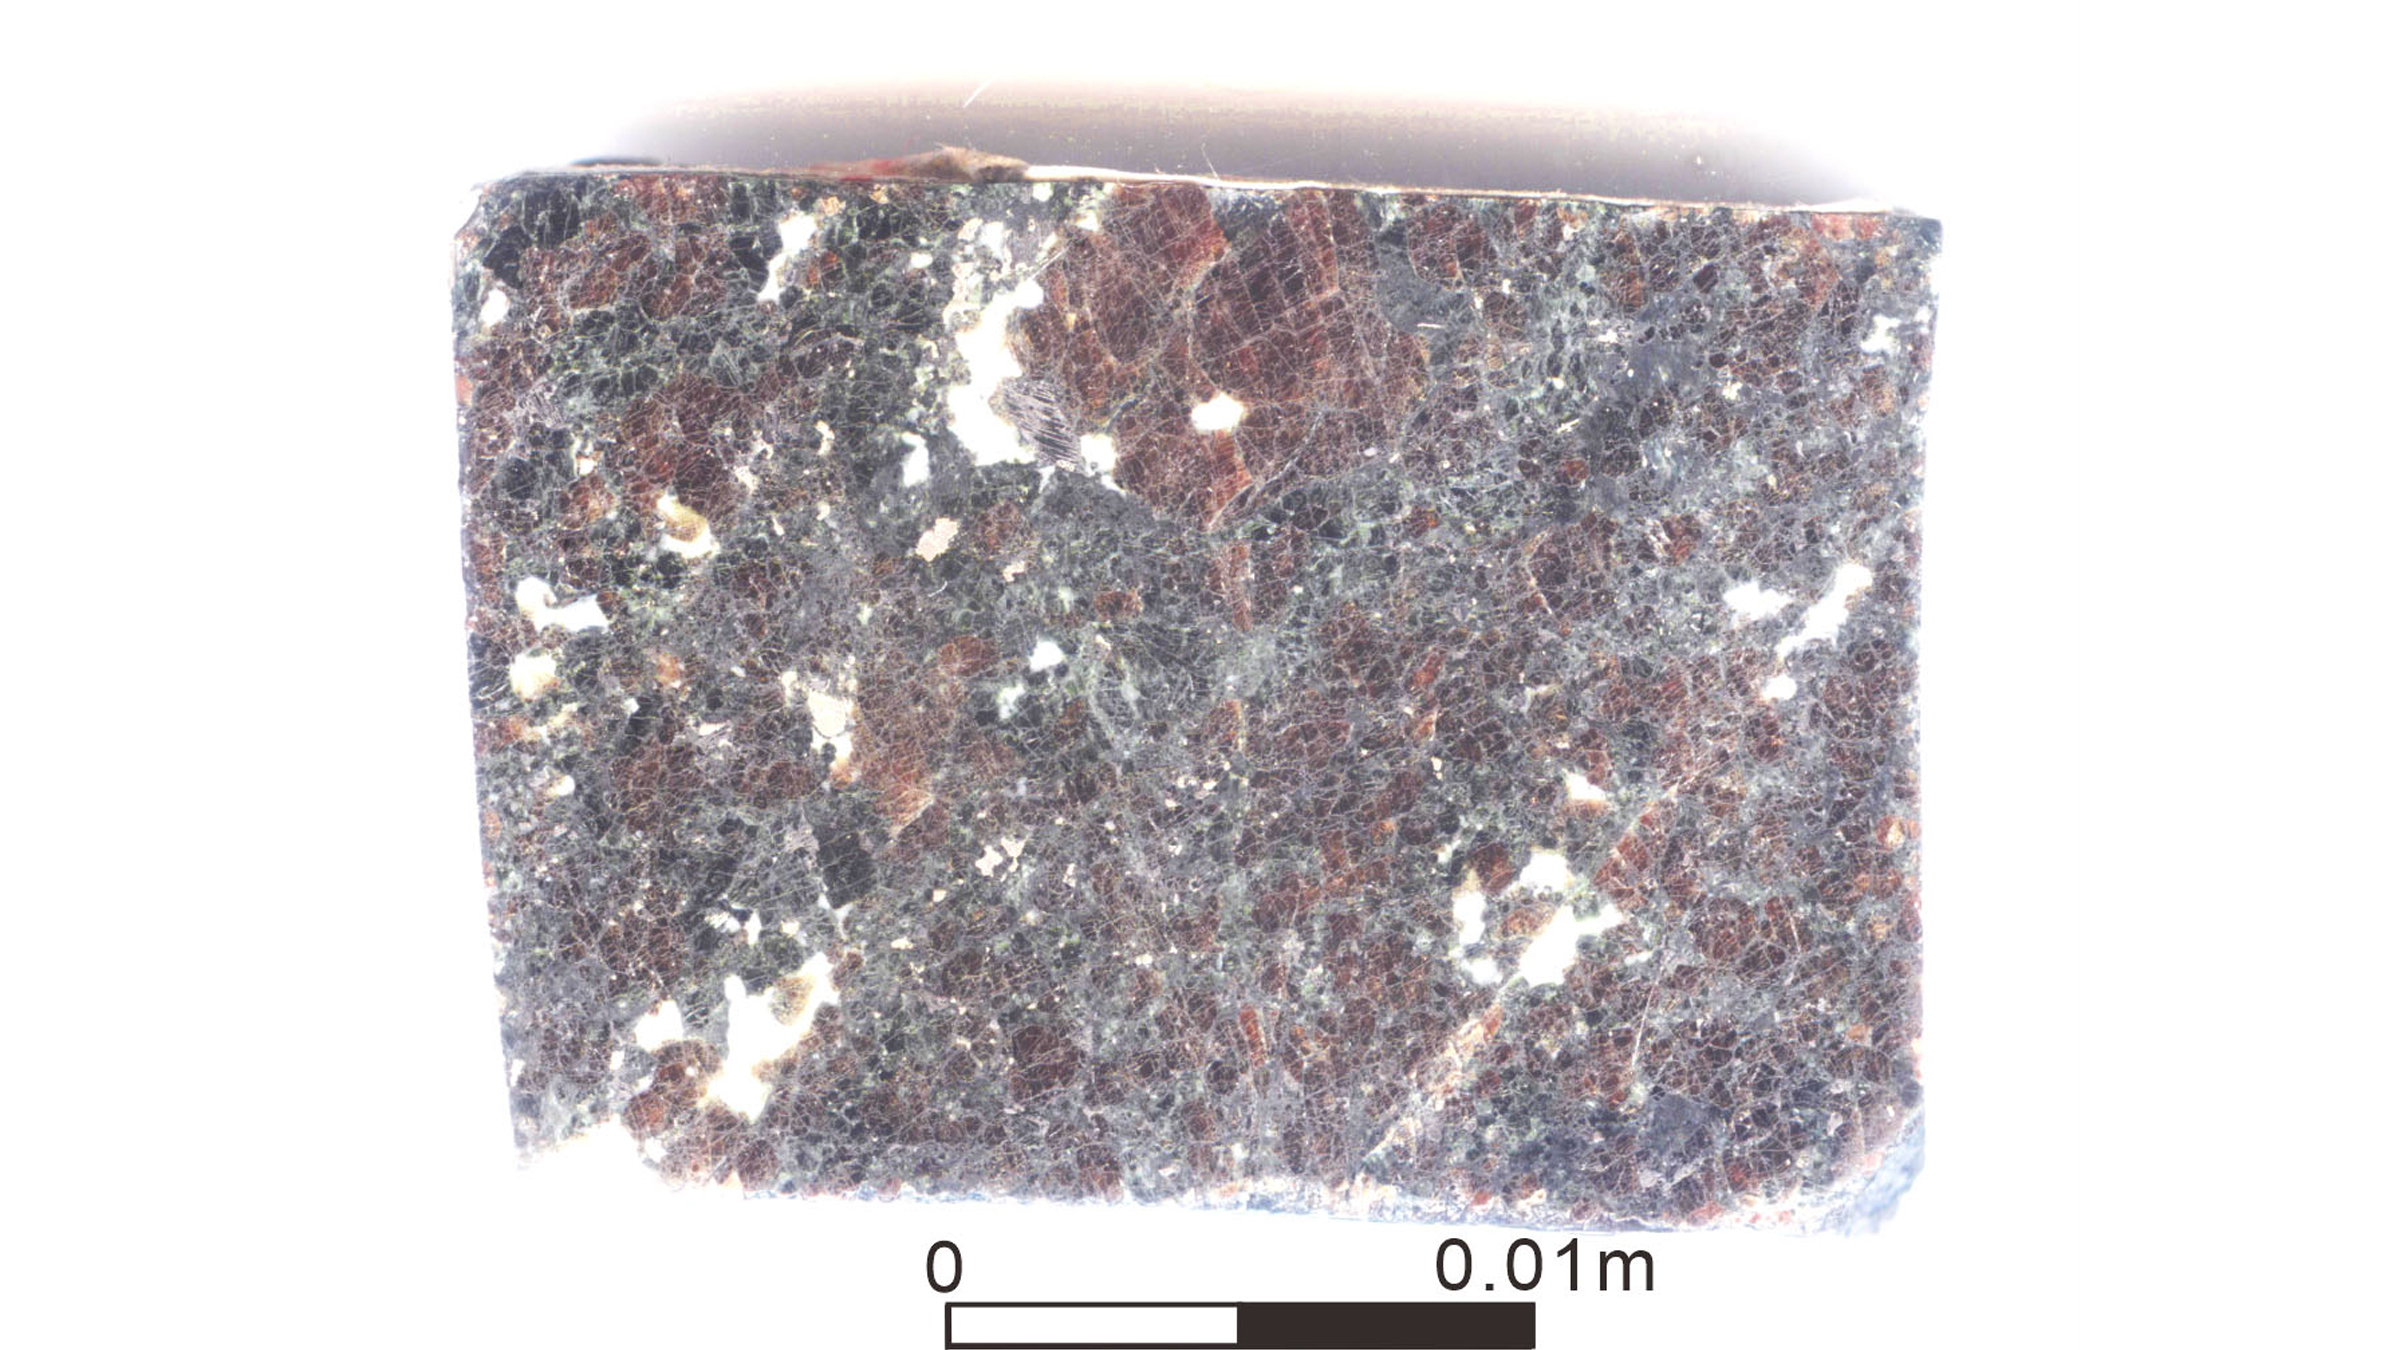 An Archean eclogite slab with red garnet and green pyroxene from Shangying, China.